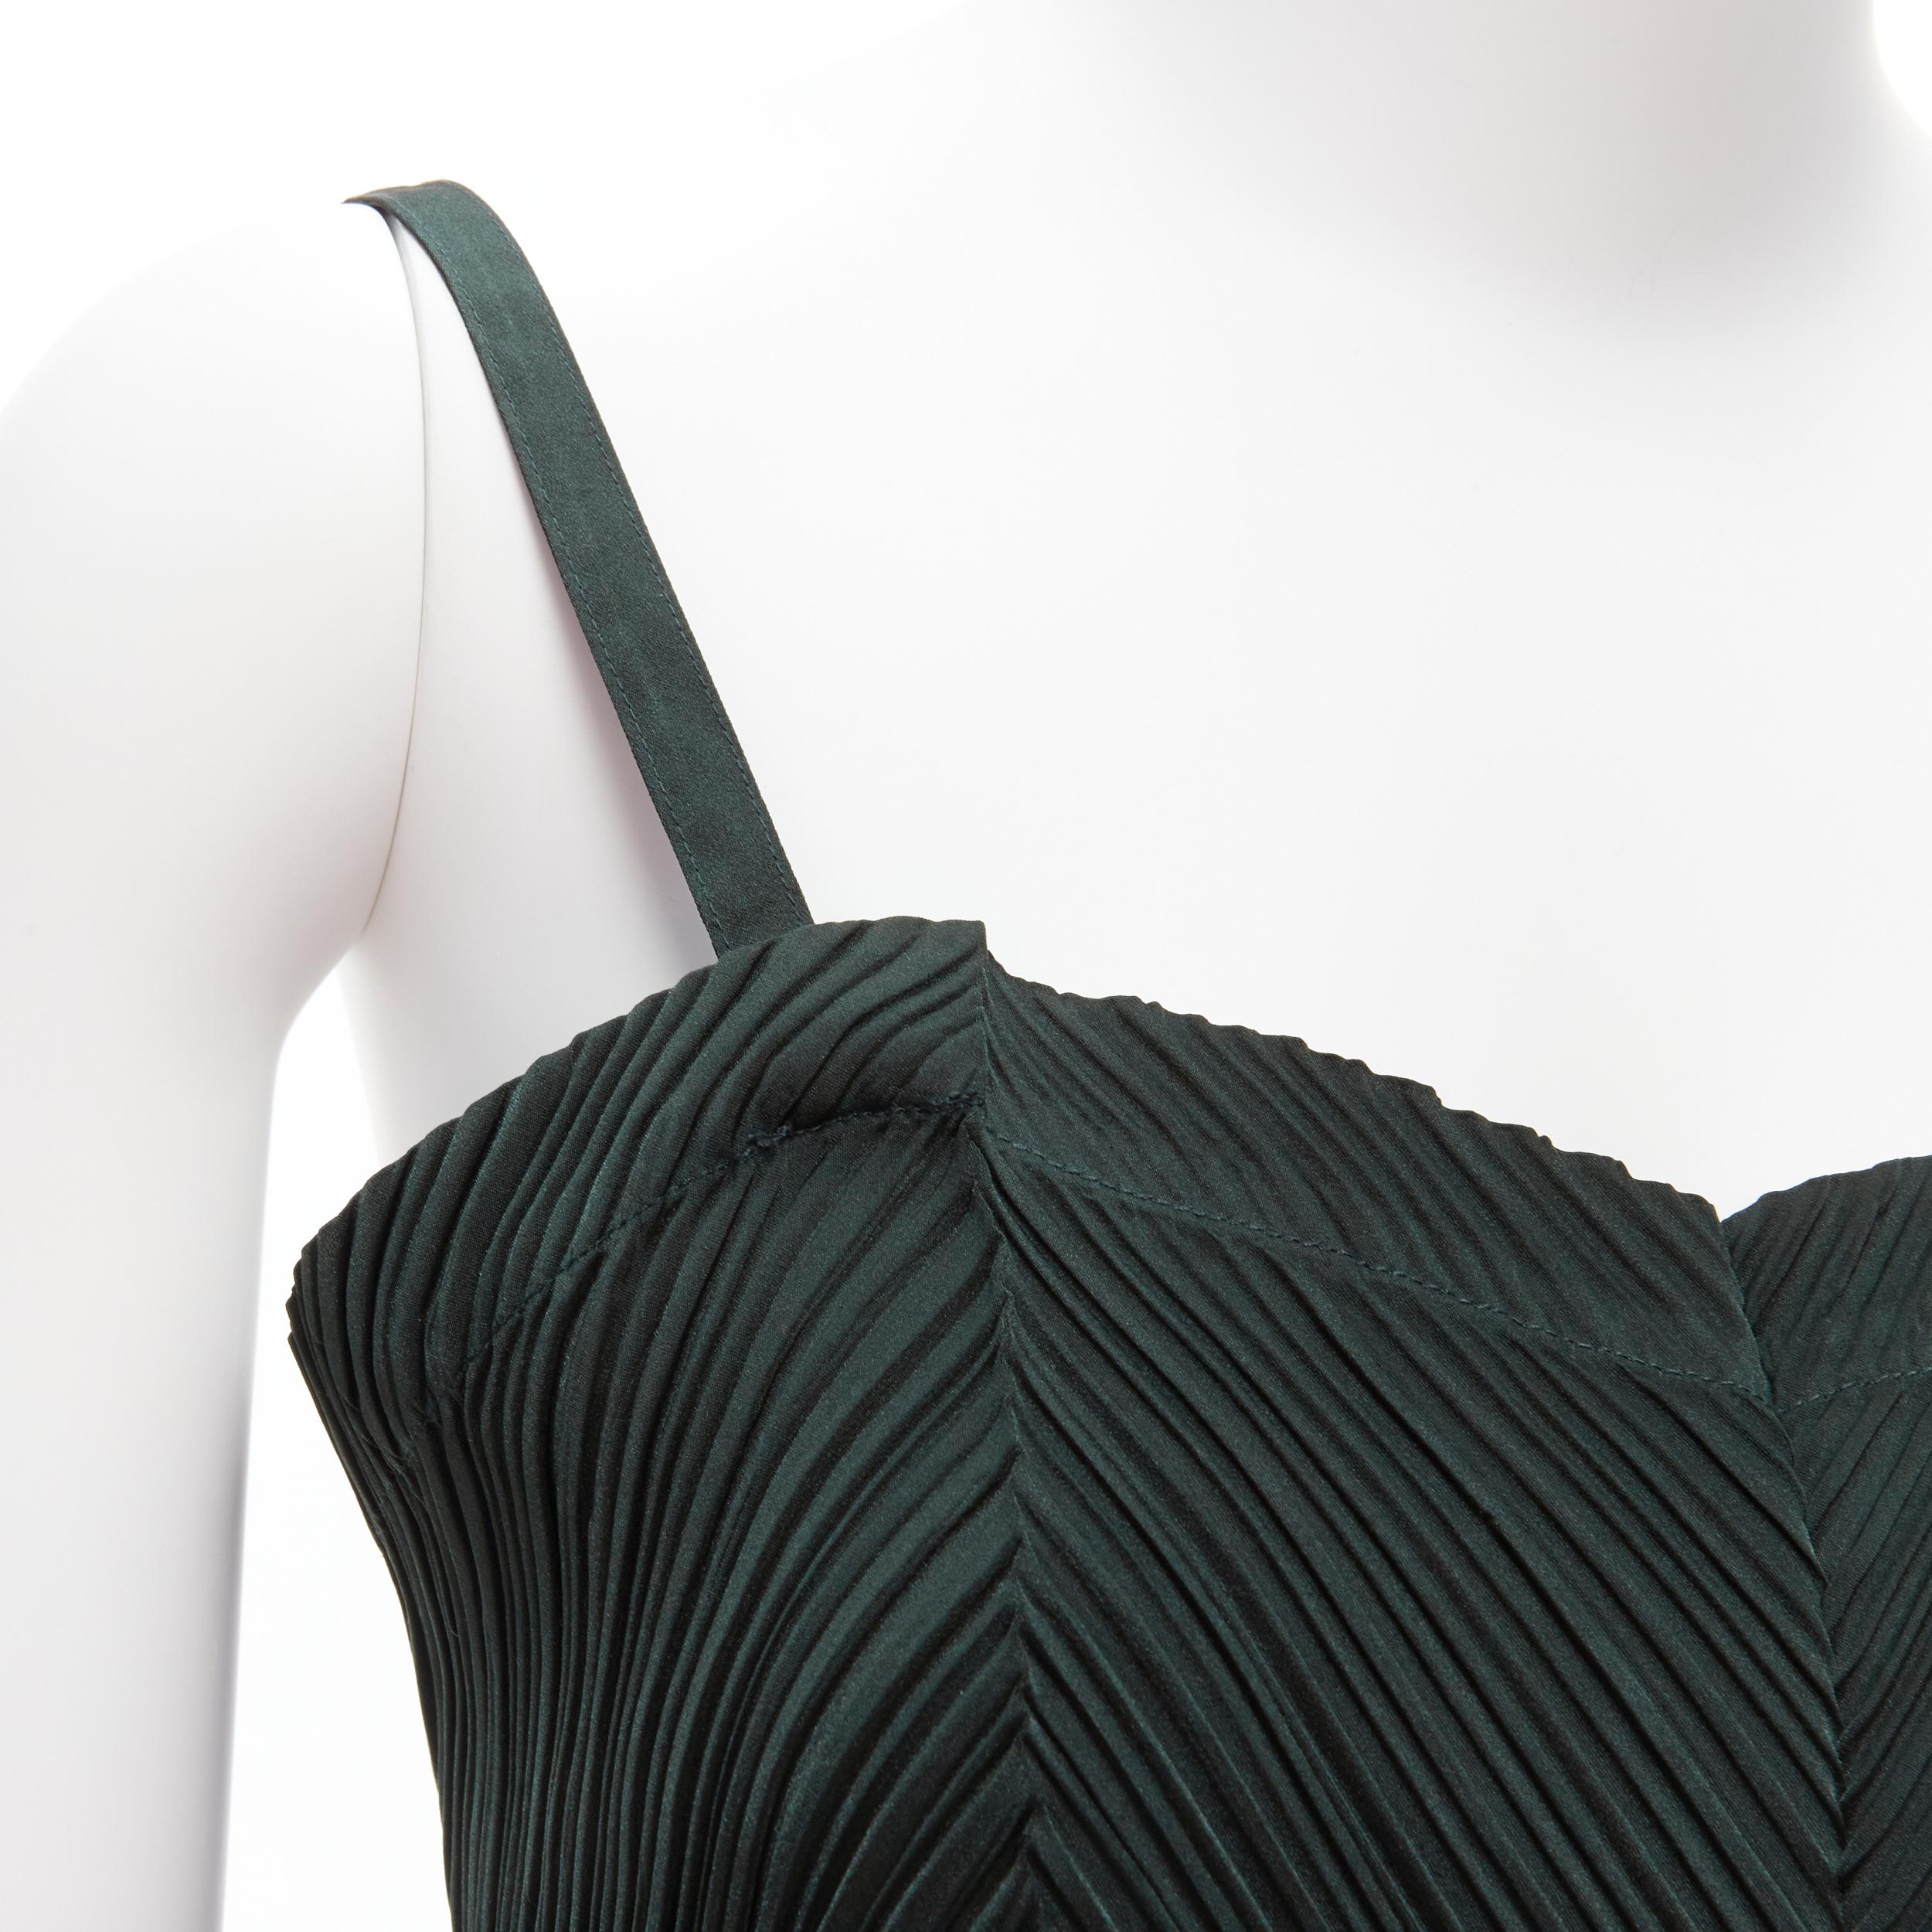 ISSEY MIYAKE dark green spaghetti strap plisse camisole vest top M
Reference: TGAS/D00085
Brand: Issey Miyake
Material: Polyester
Color: Green
Pattern: Solid
Closure: Slip On
Made in: Japan

CONDITION:
Condition: Excellent, this item was pre-owned